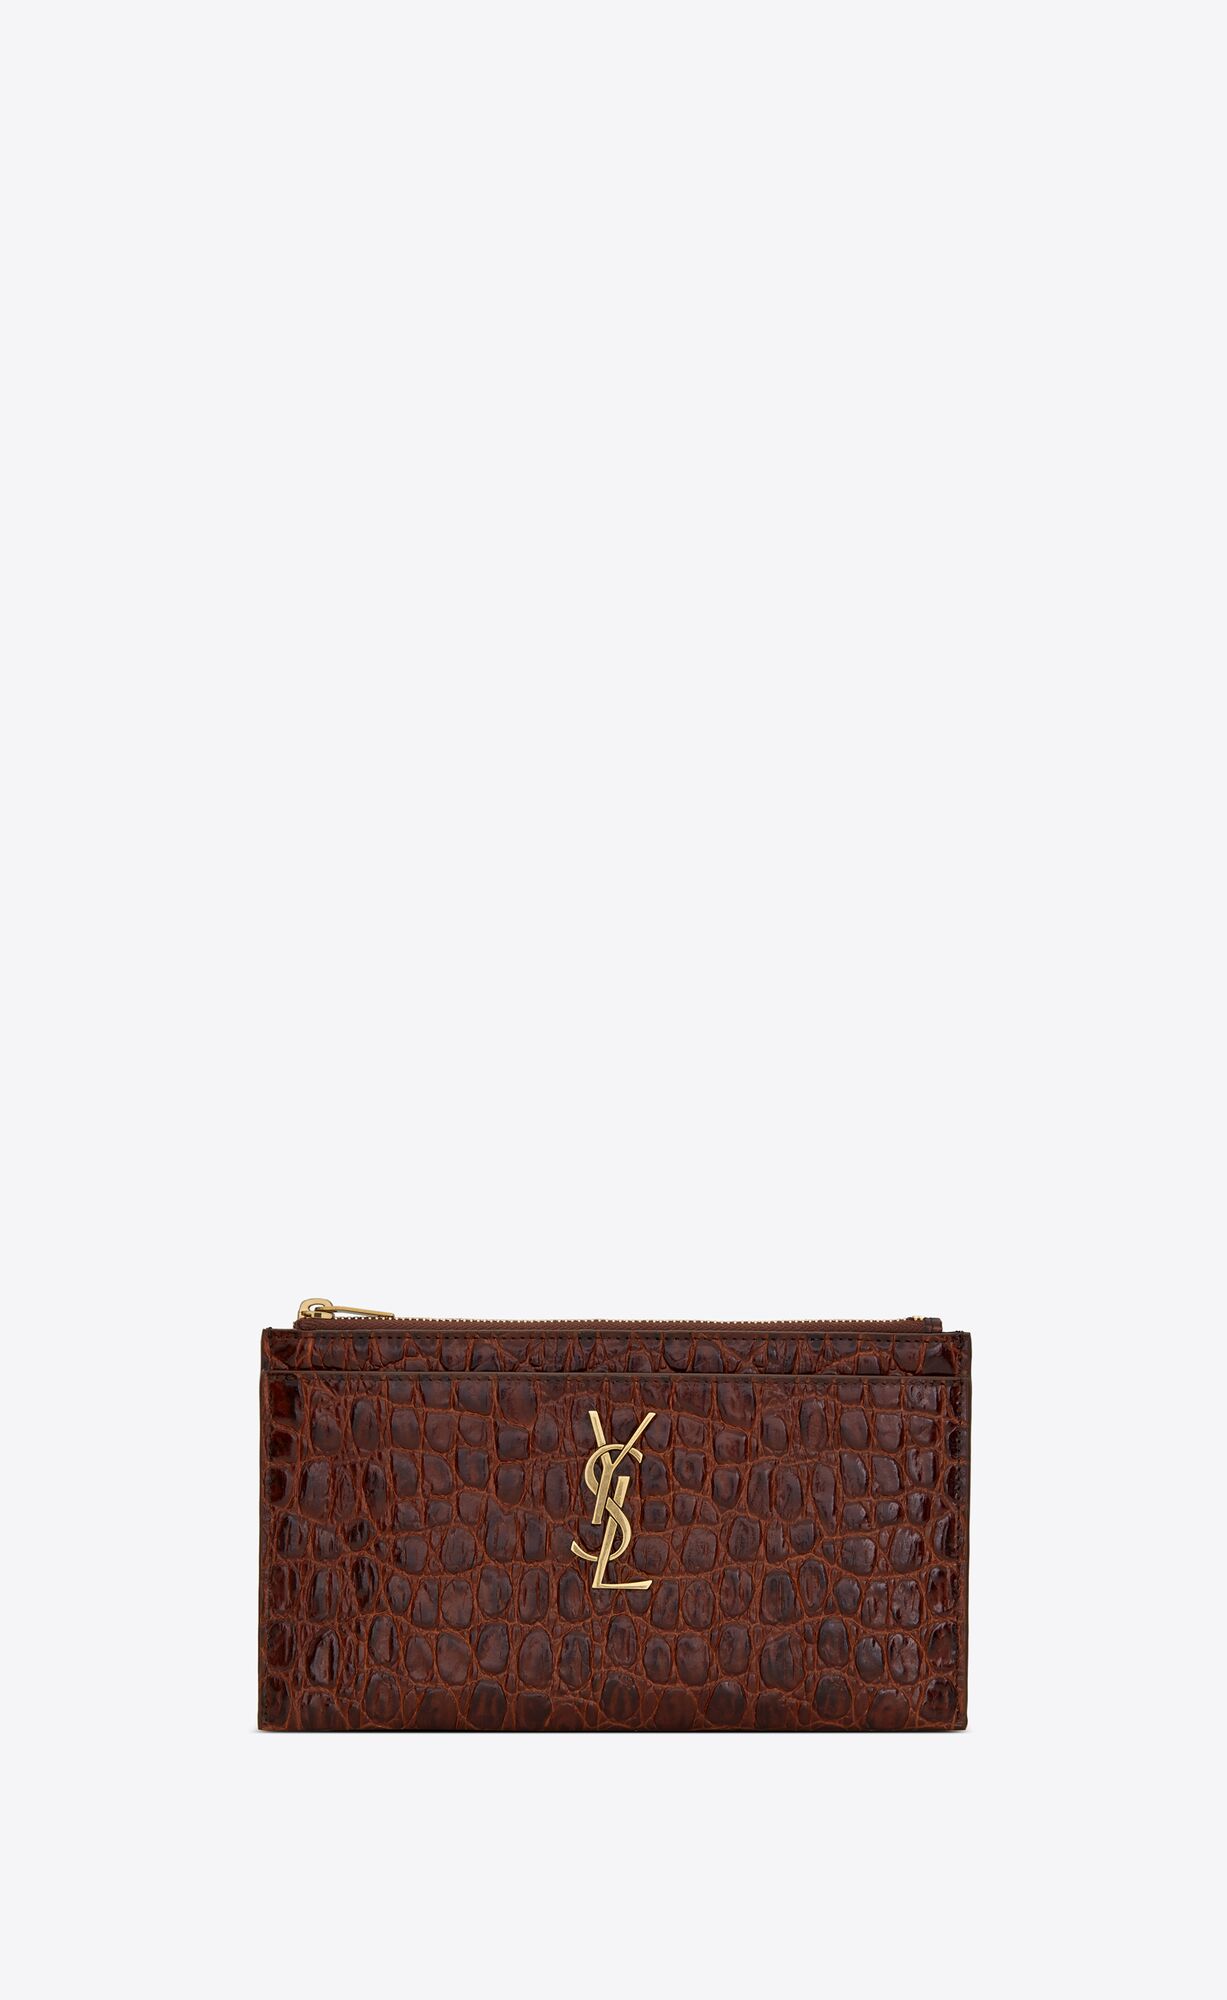 YSL MONOGRAM SMALL BILL POUCH UNBOXING + REVIEW 